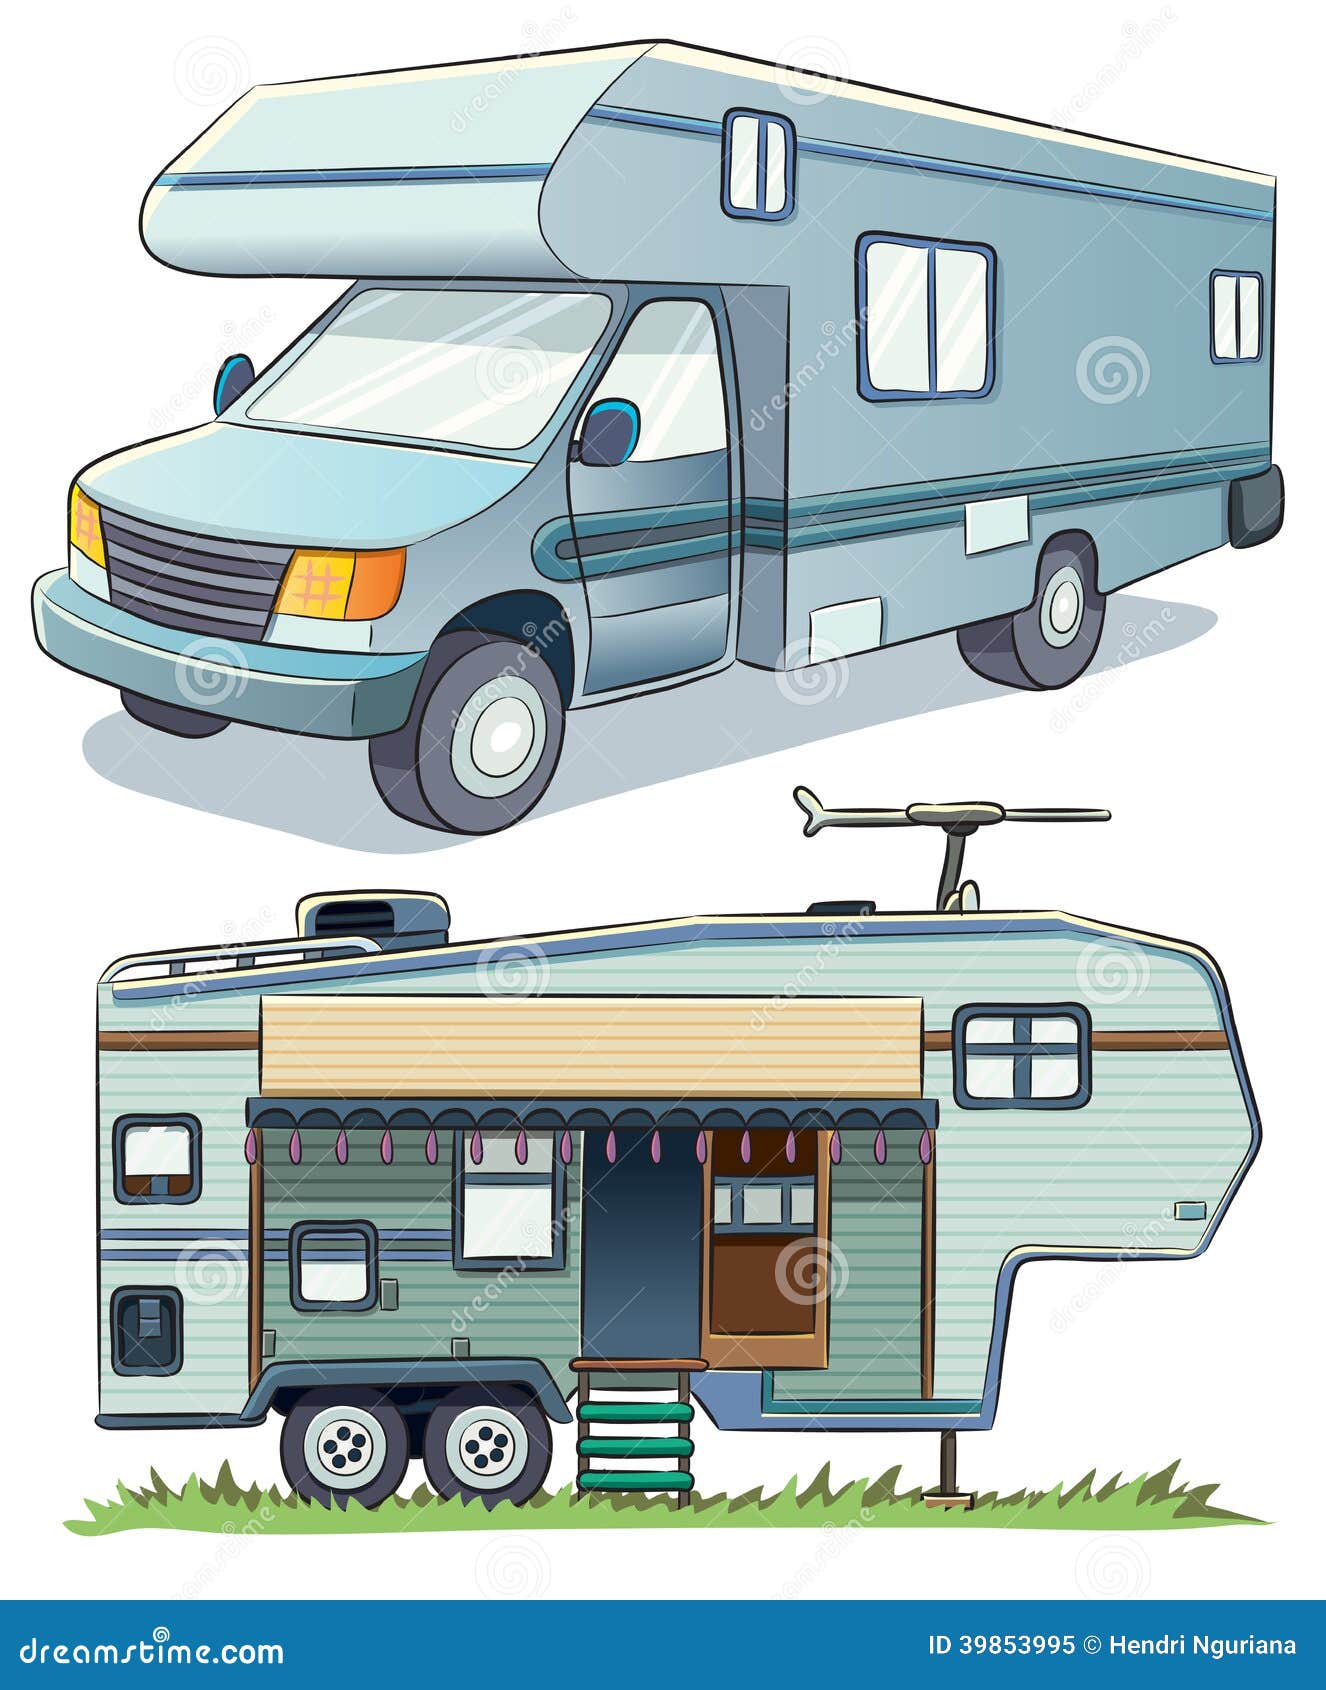 RV Car stock vector. Illustration of portable, stay, object - 39853995